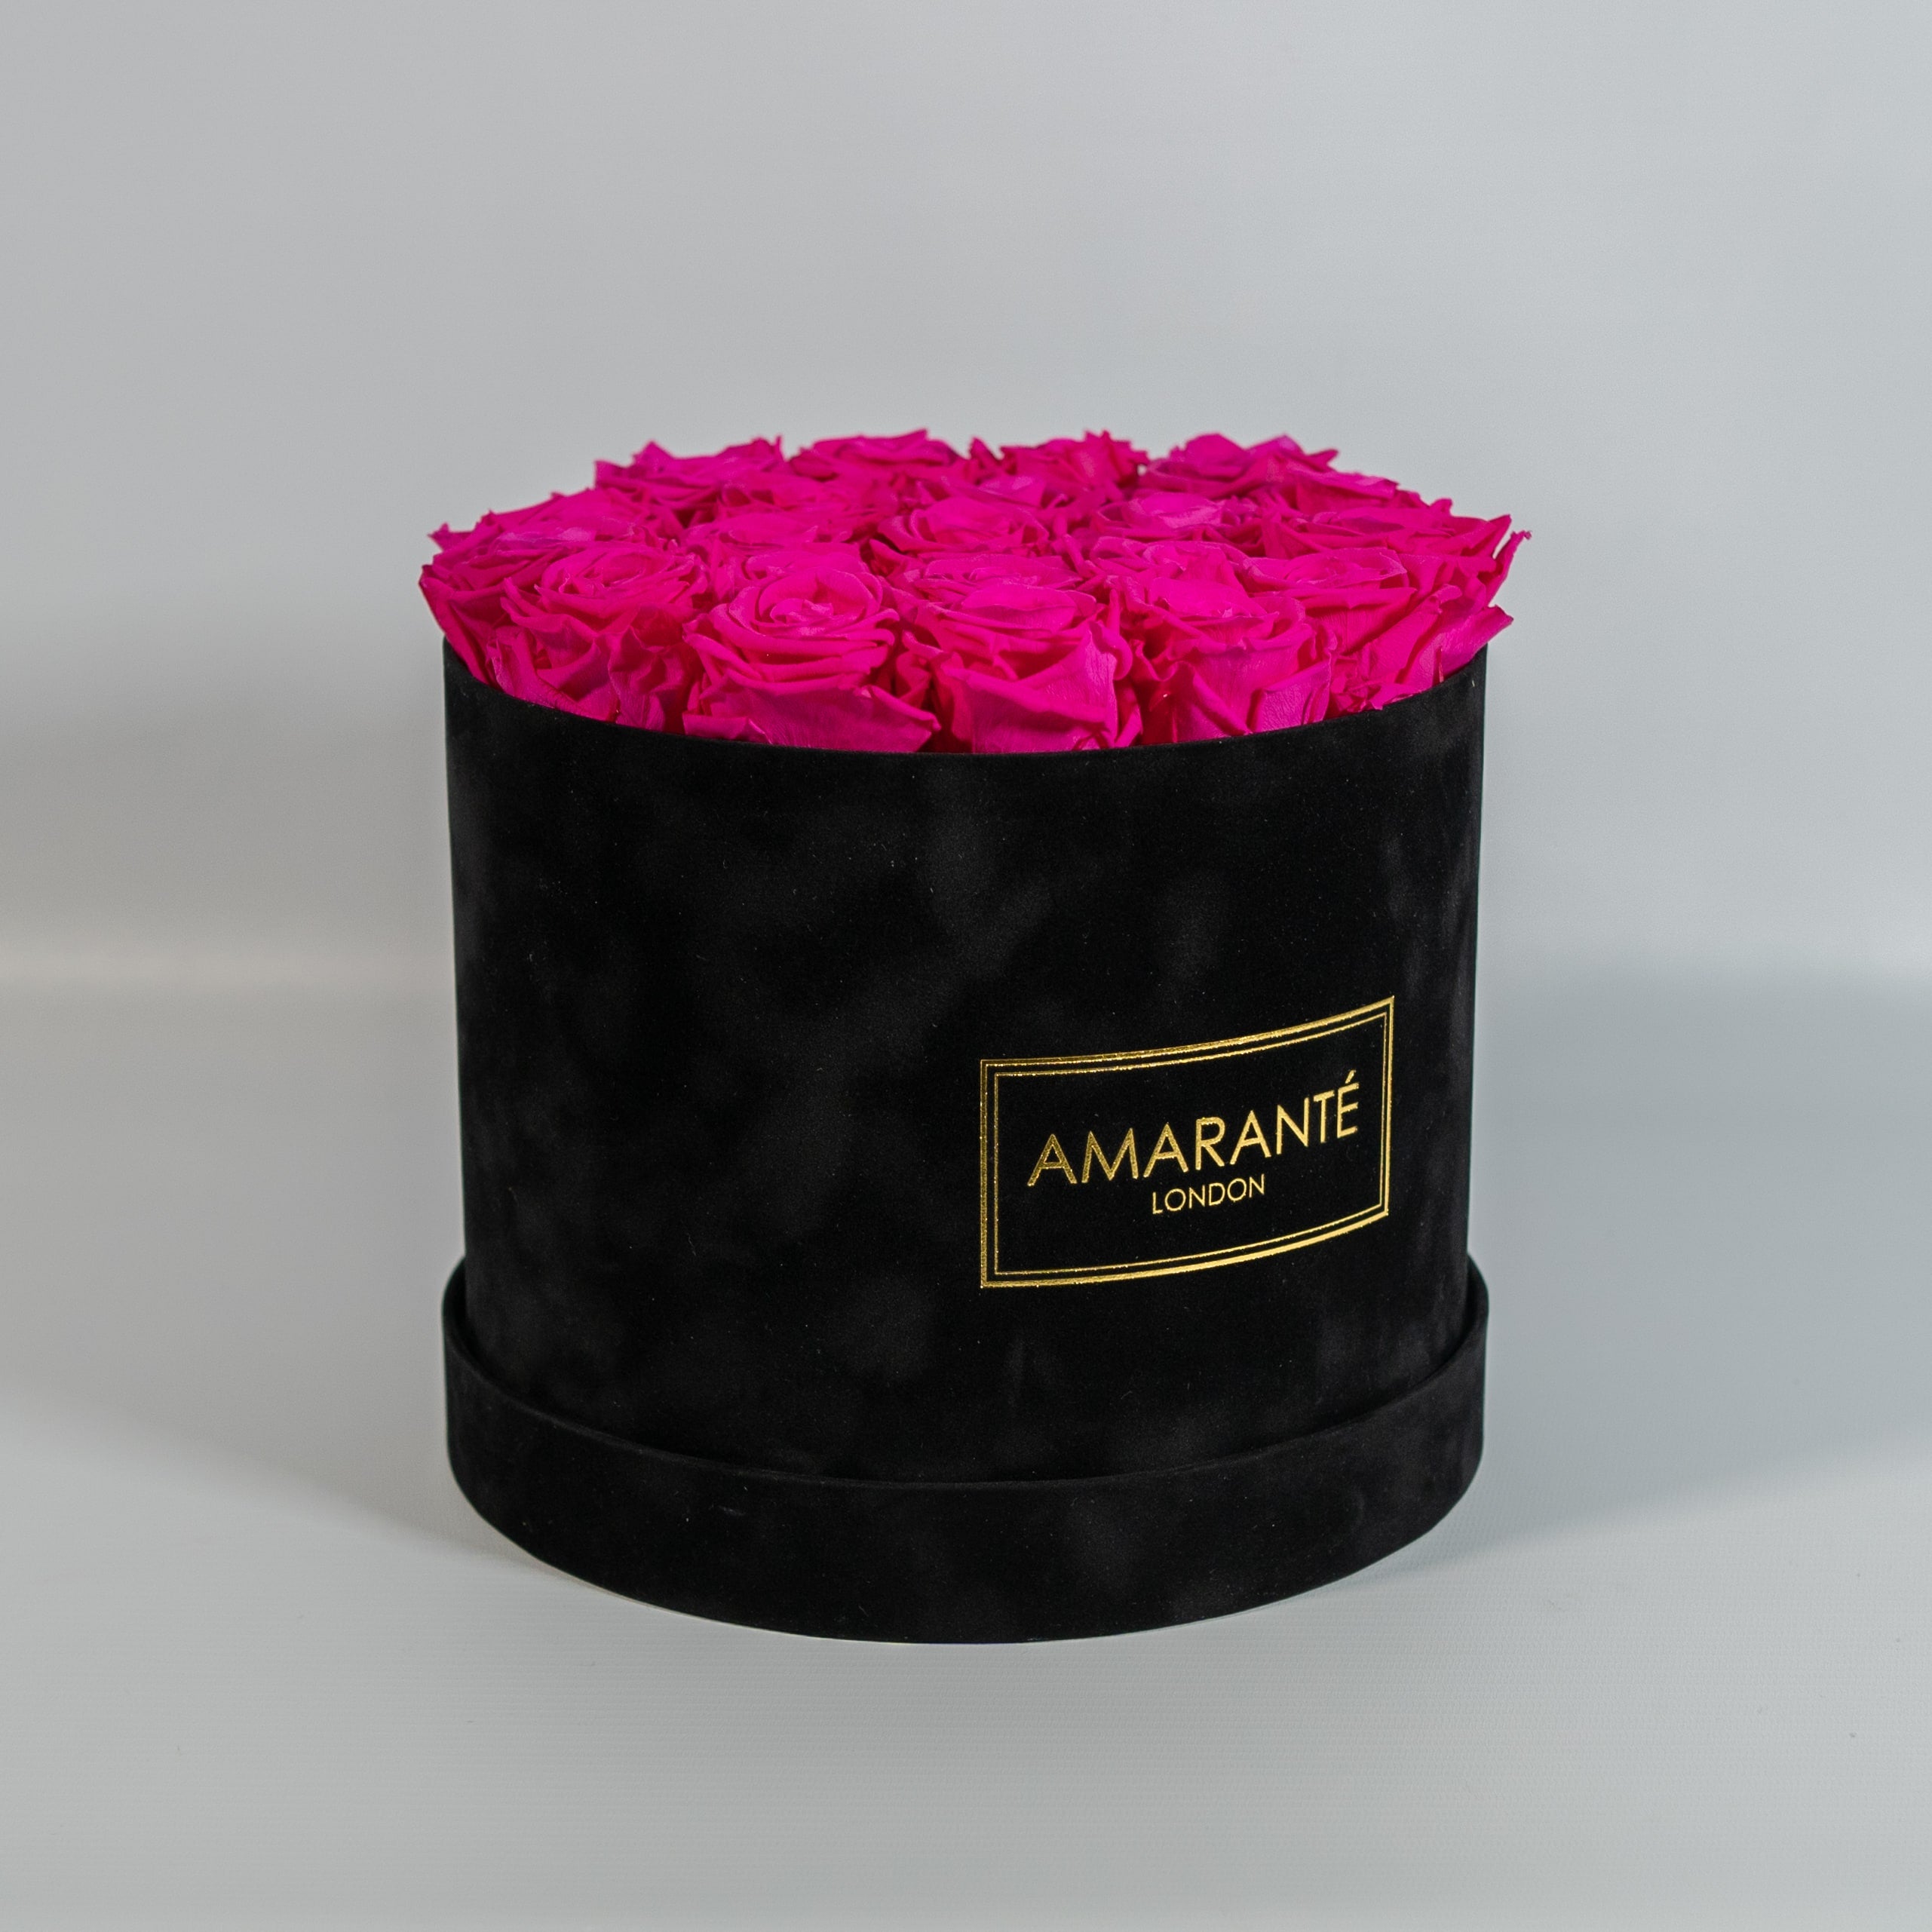 Distinctive hot pink Roses implying beauty, love, and care